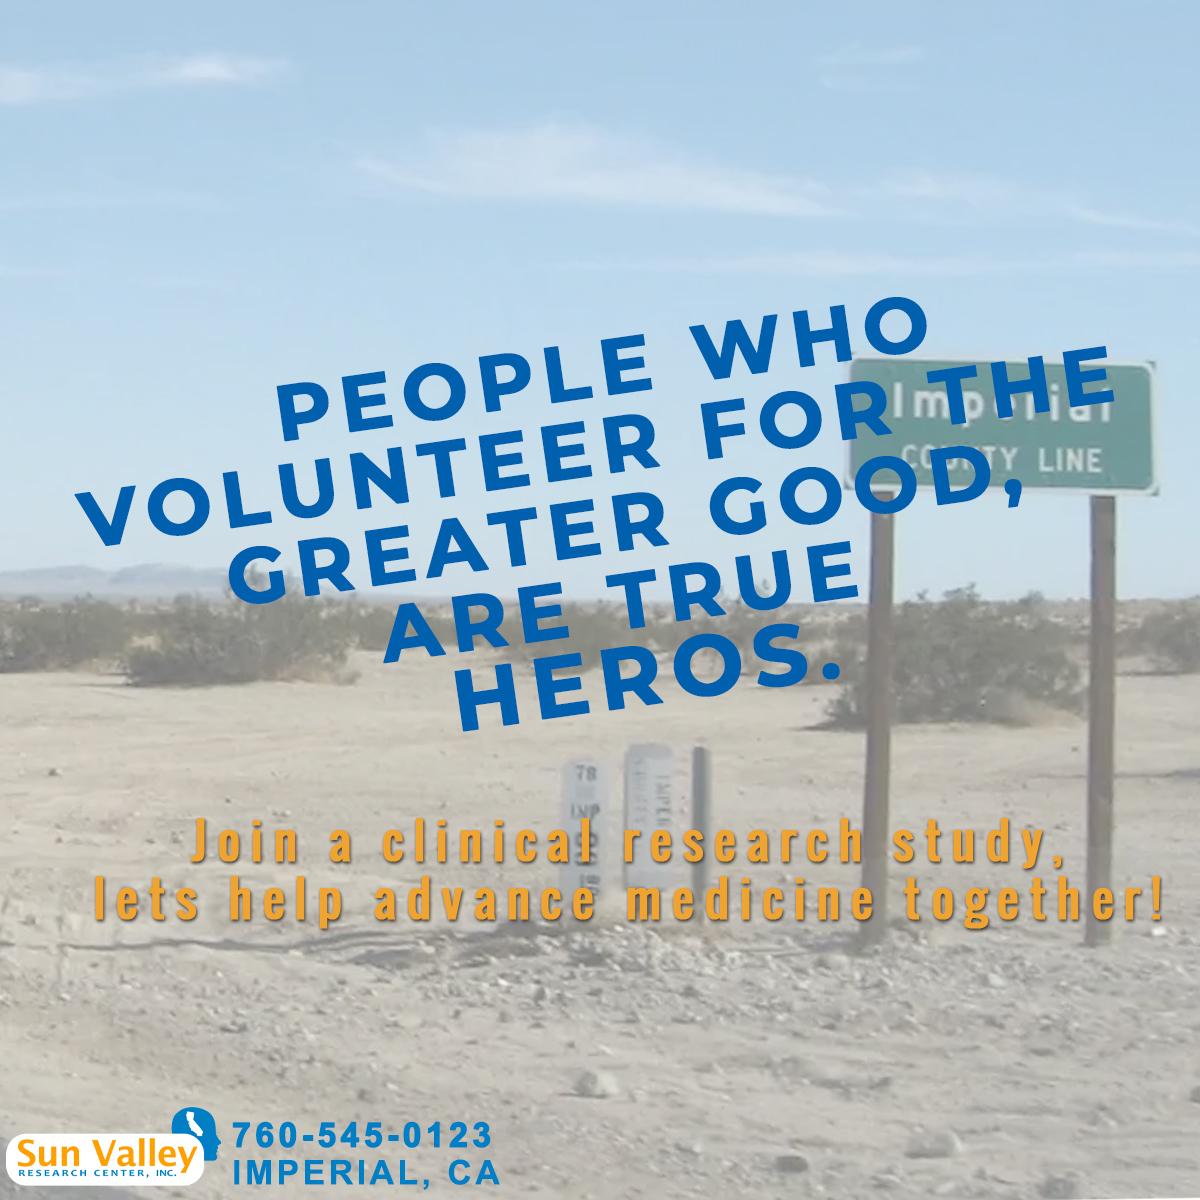 Call us at 760-545-0123. We have several research studies enrolling. 
#SunValleyResearchCenter #SVRC #Imperial #ImperialCA #volunteer #participatenow #volunteering #participate #volunteers #participateinresearch #volunteeropportunities #volunteeringmatters #volunteeringrocks